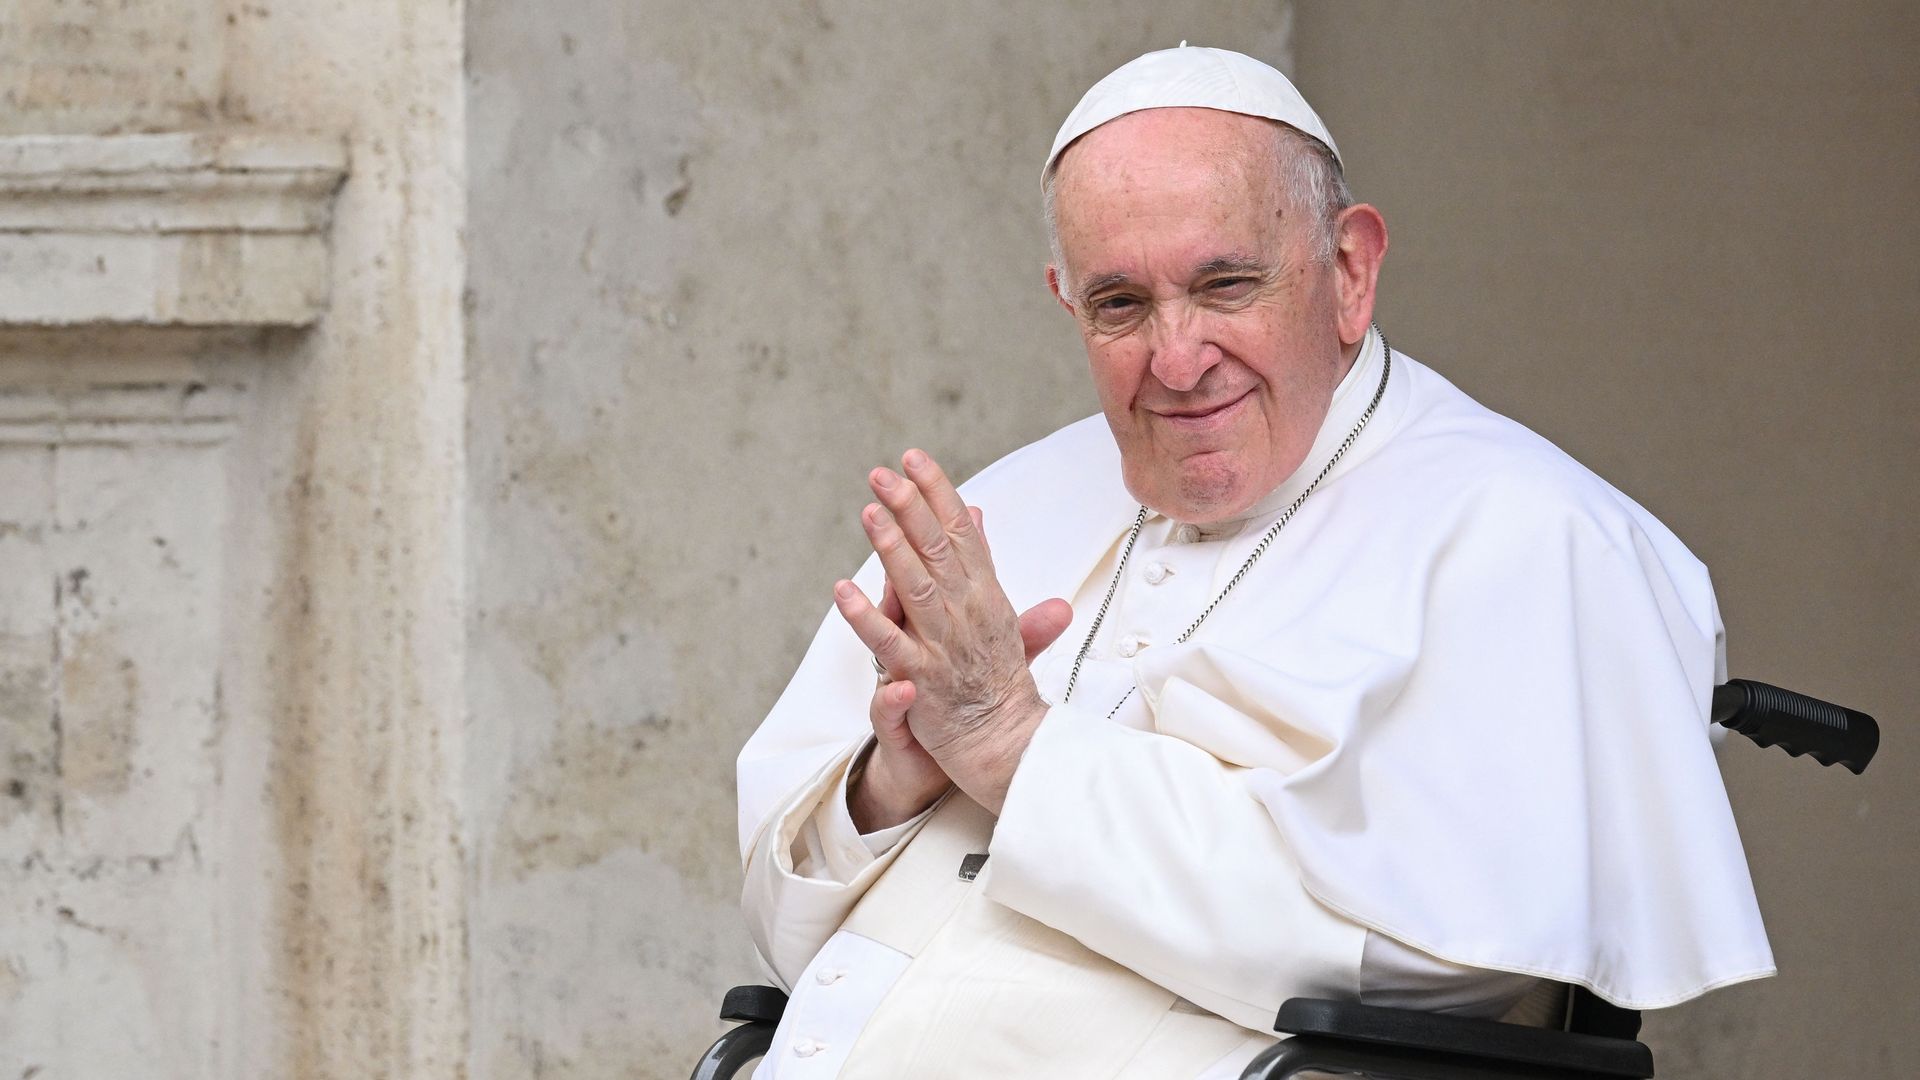 Pope Francis, seated in a wheelchair following knee treatment, on June 4, 2022 at San Damaso courtyard in The Vatican.